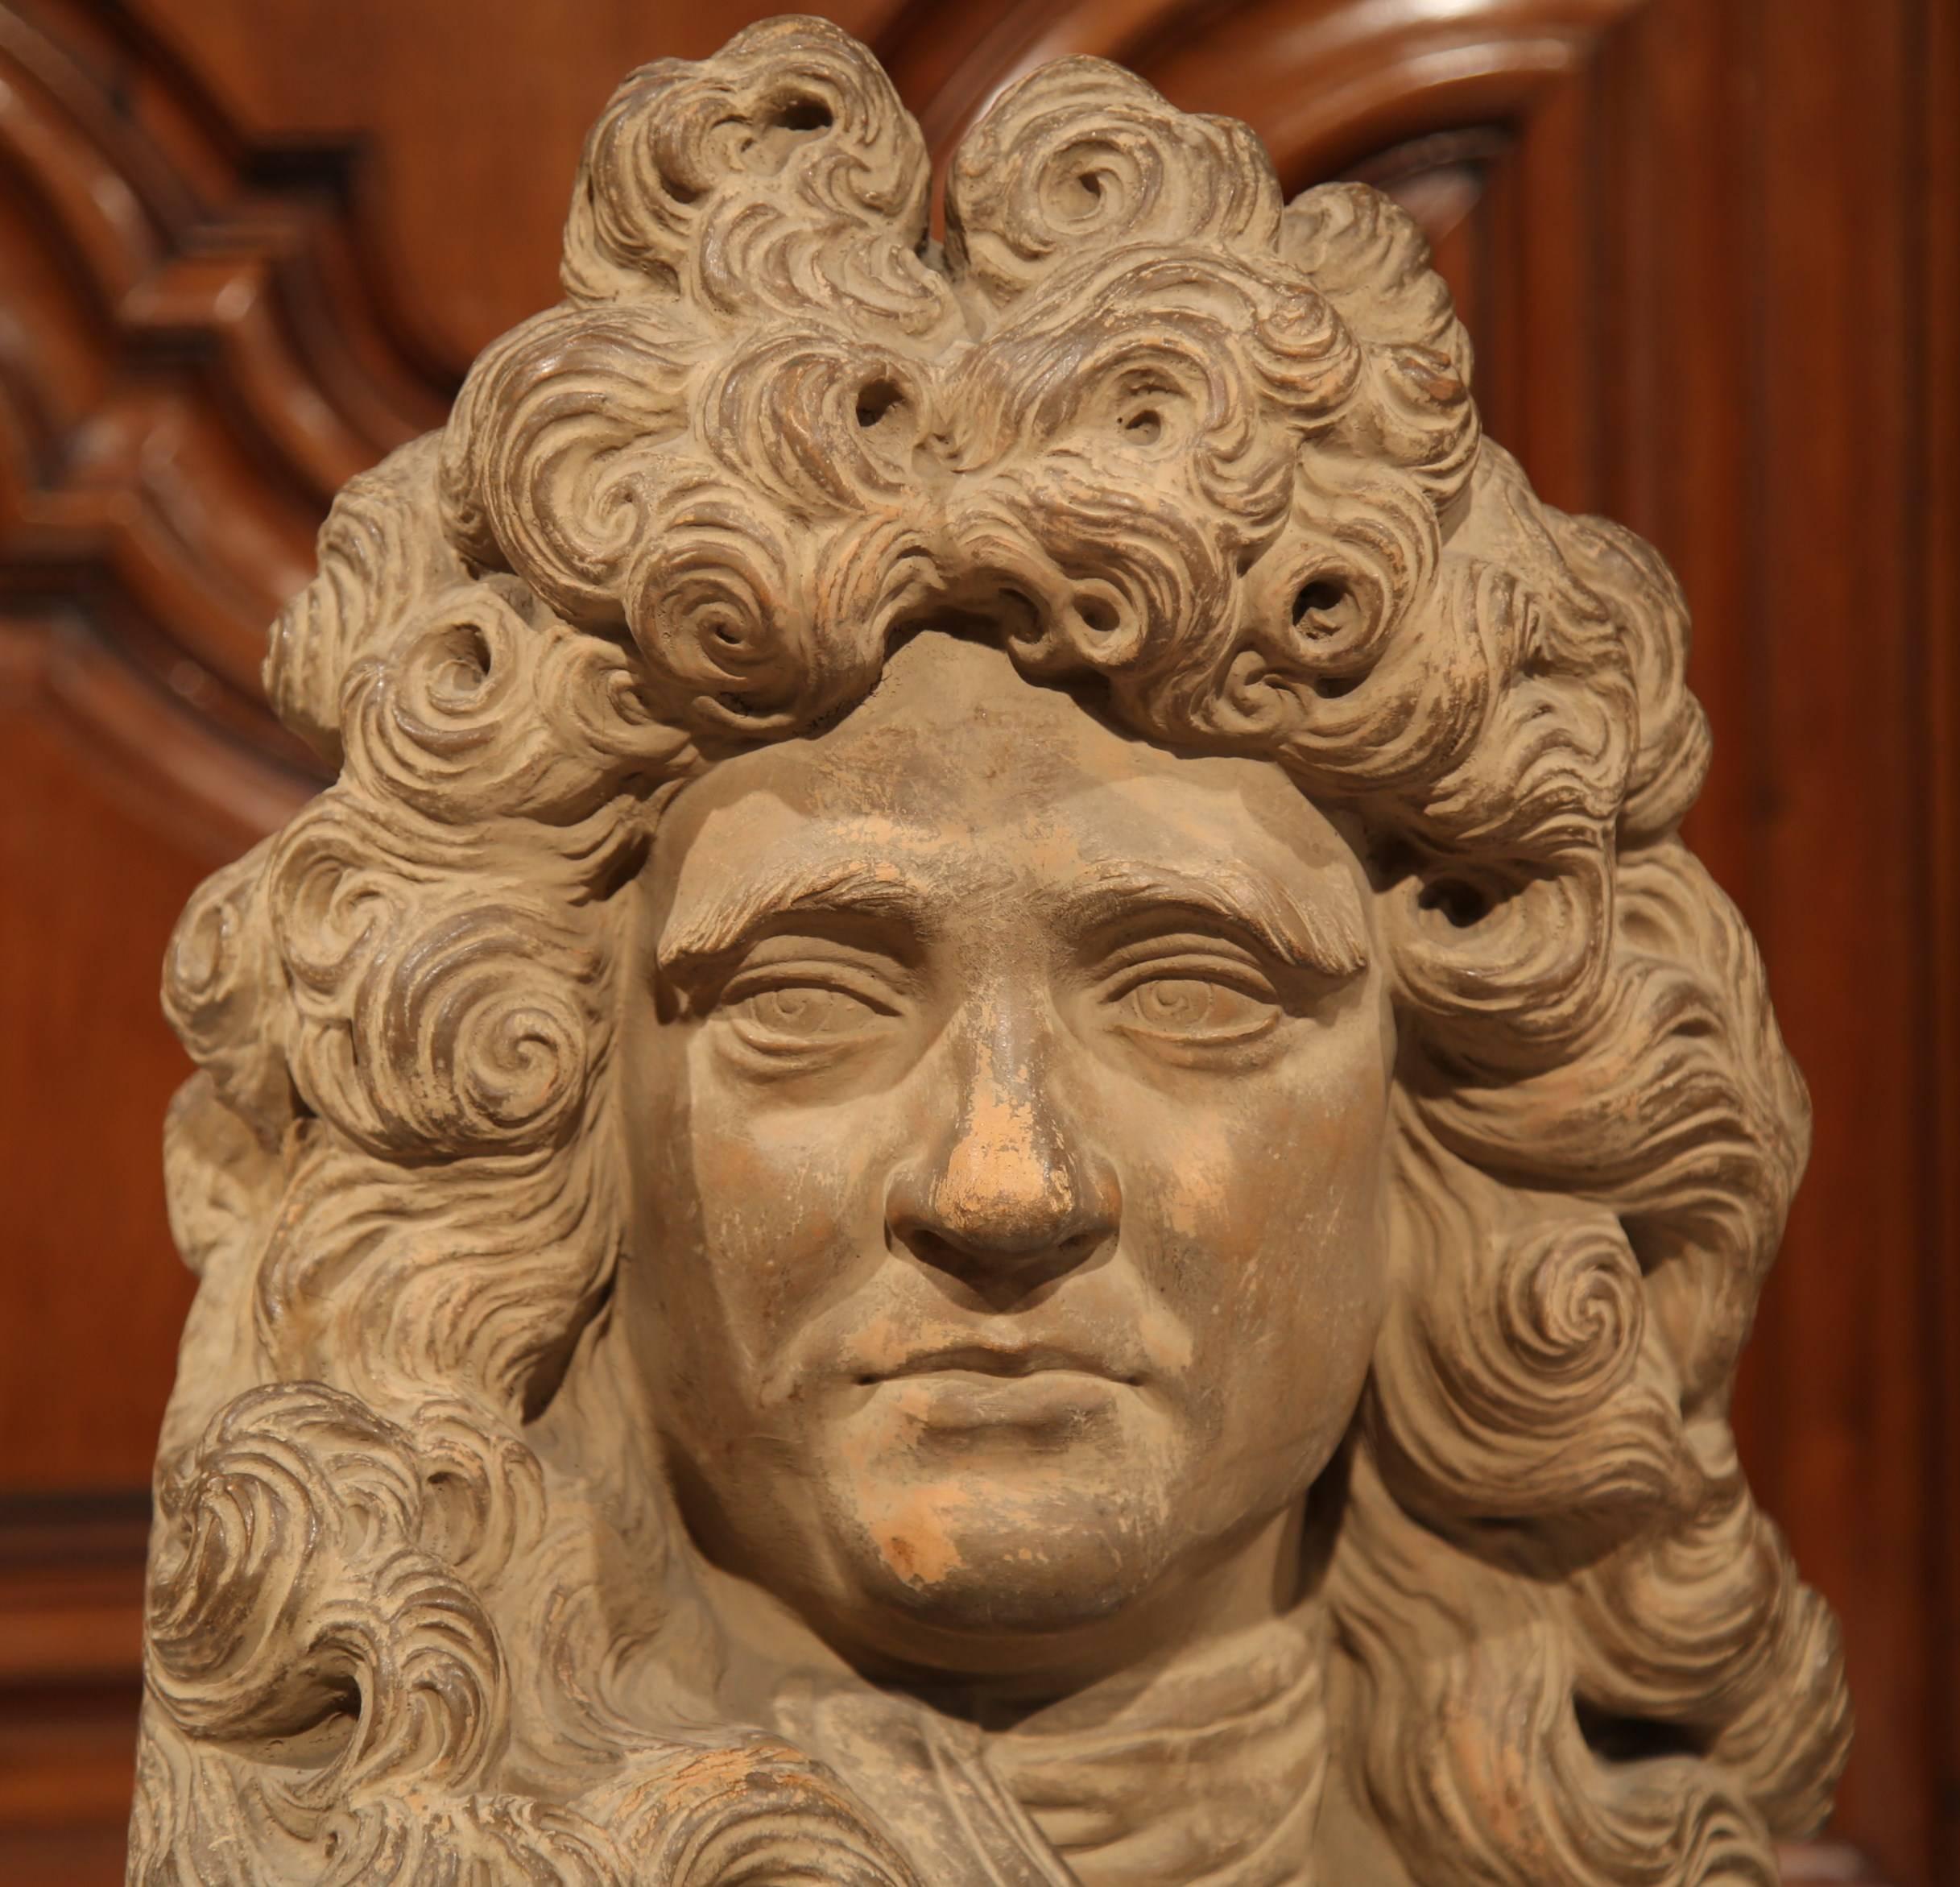 Hand-Carved Early 20th Century Carved Patinated Terracotta Bust of French Writer Moliere